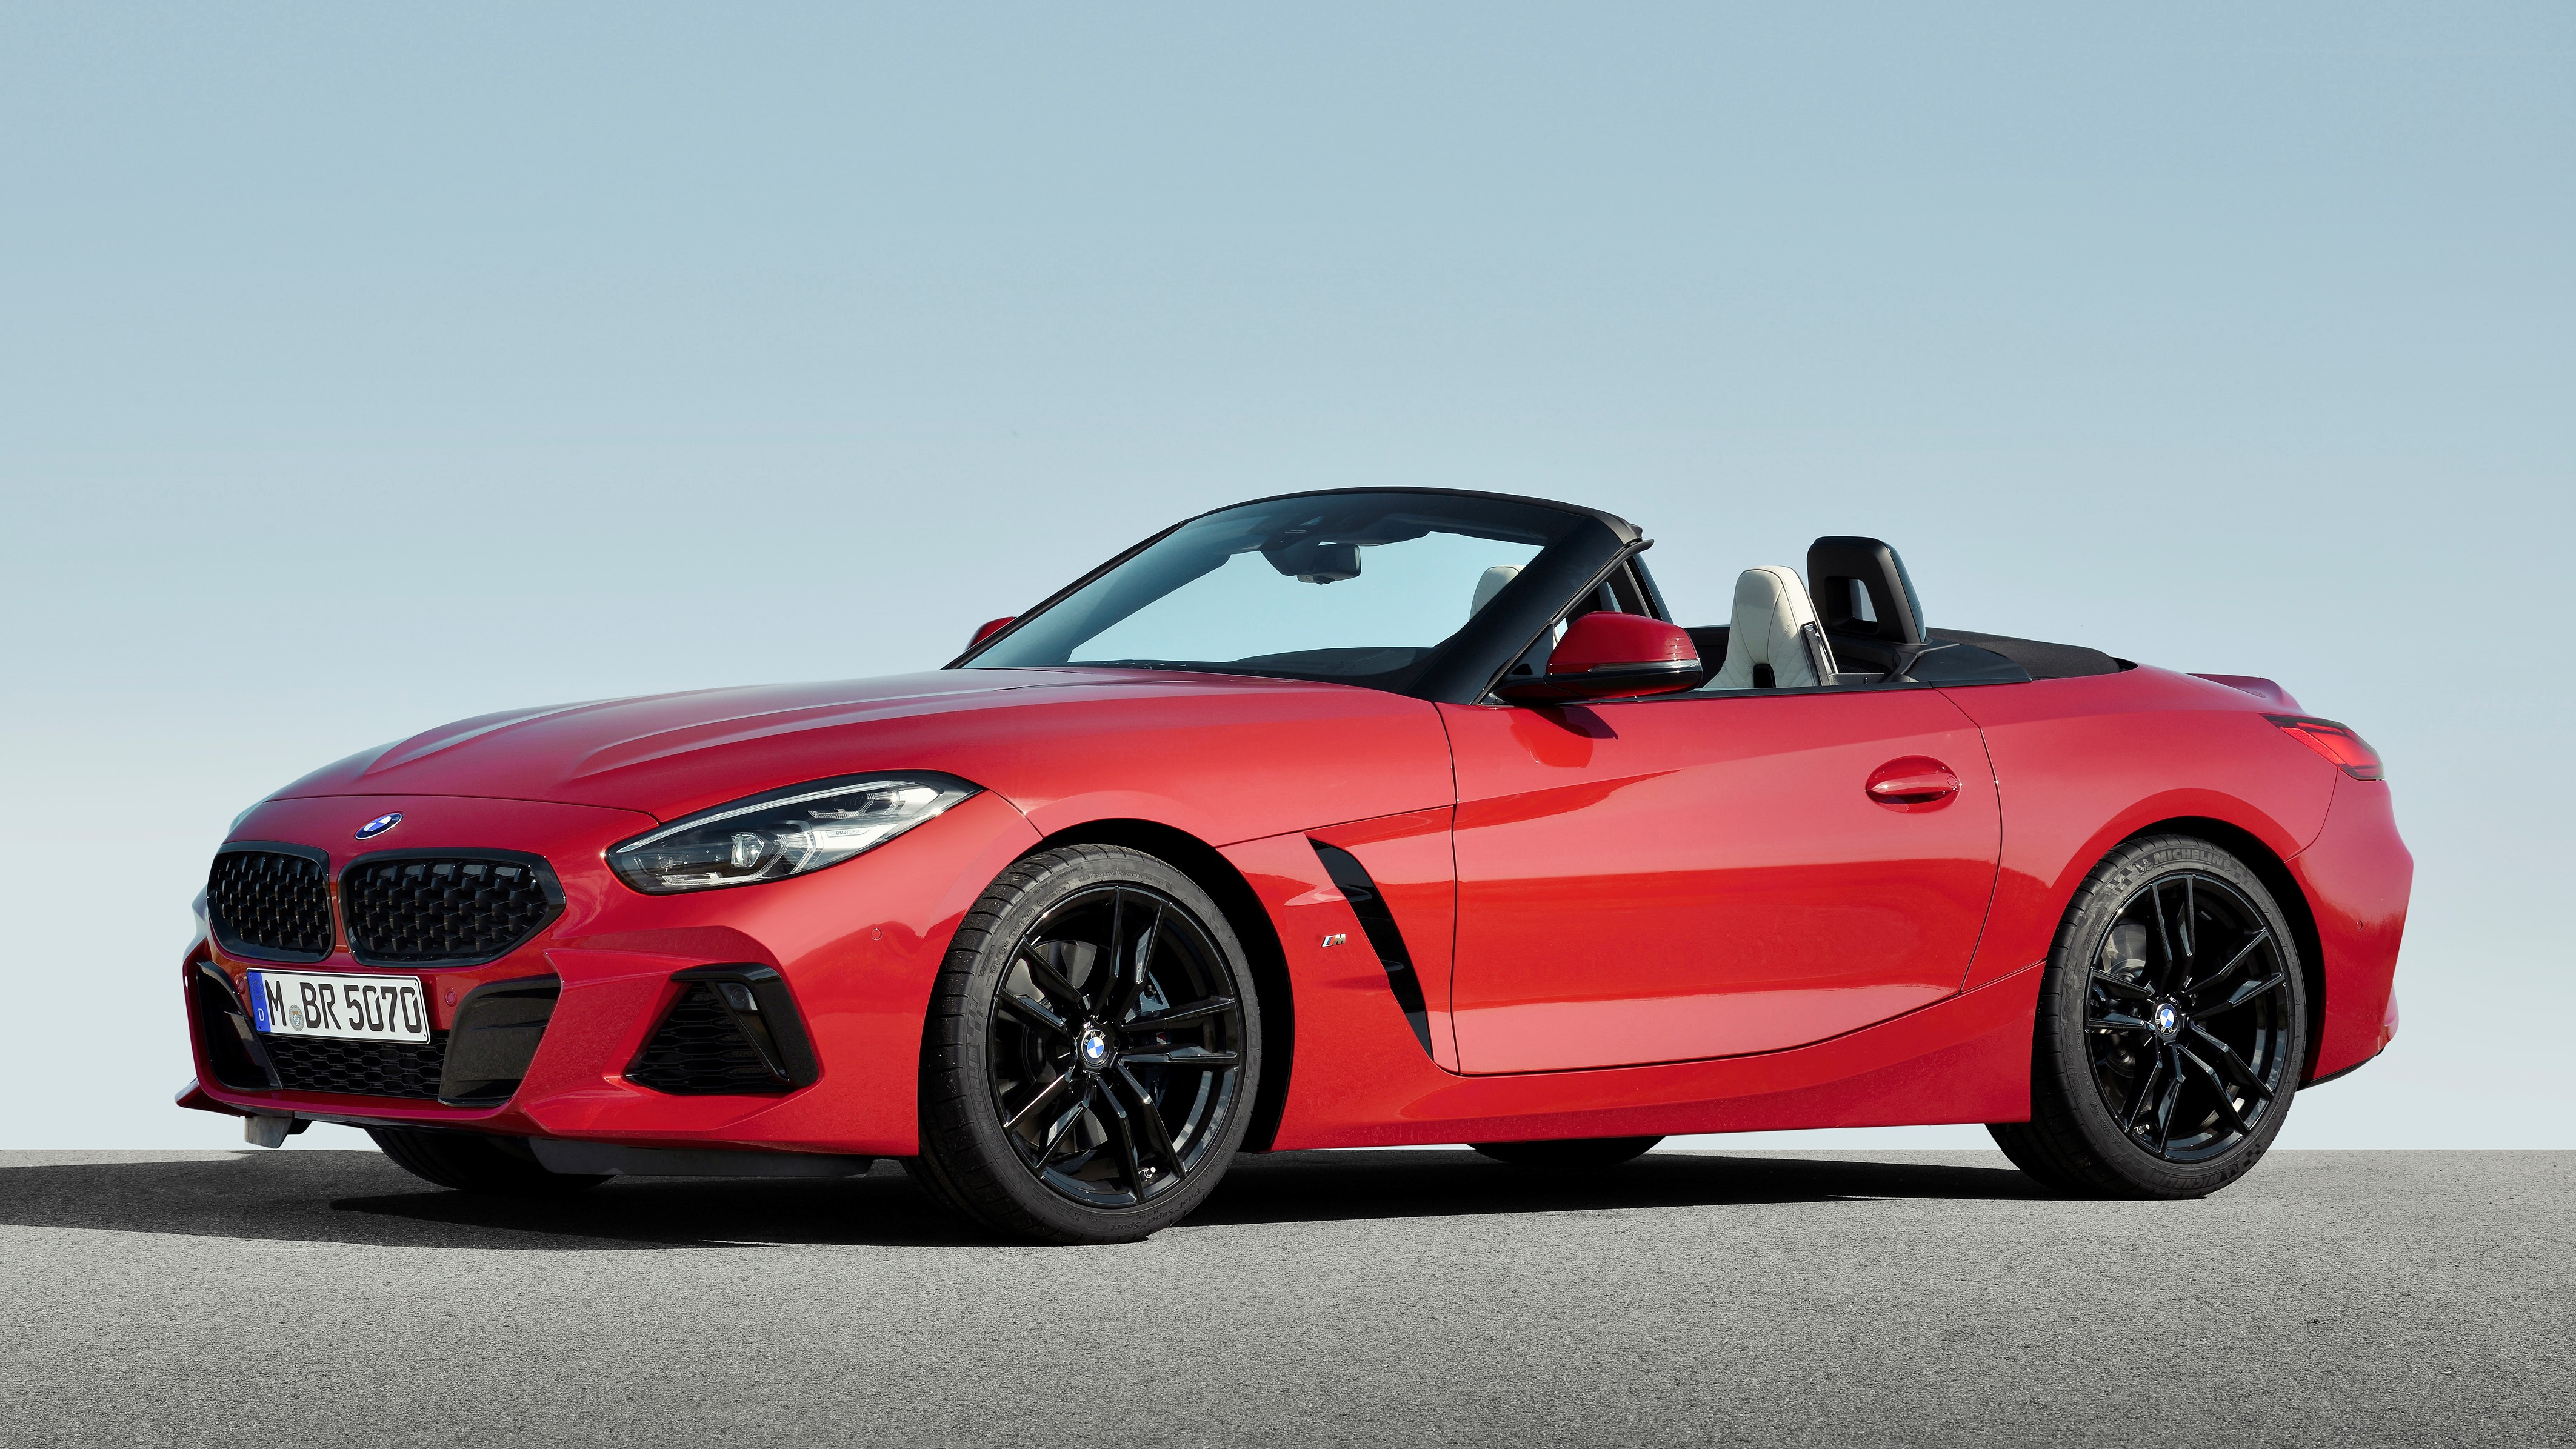 BMW Serves Up New Z4 Roadster at Pebble Beach